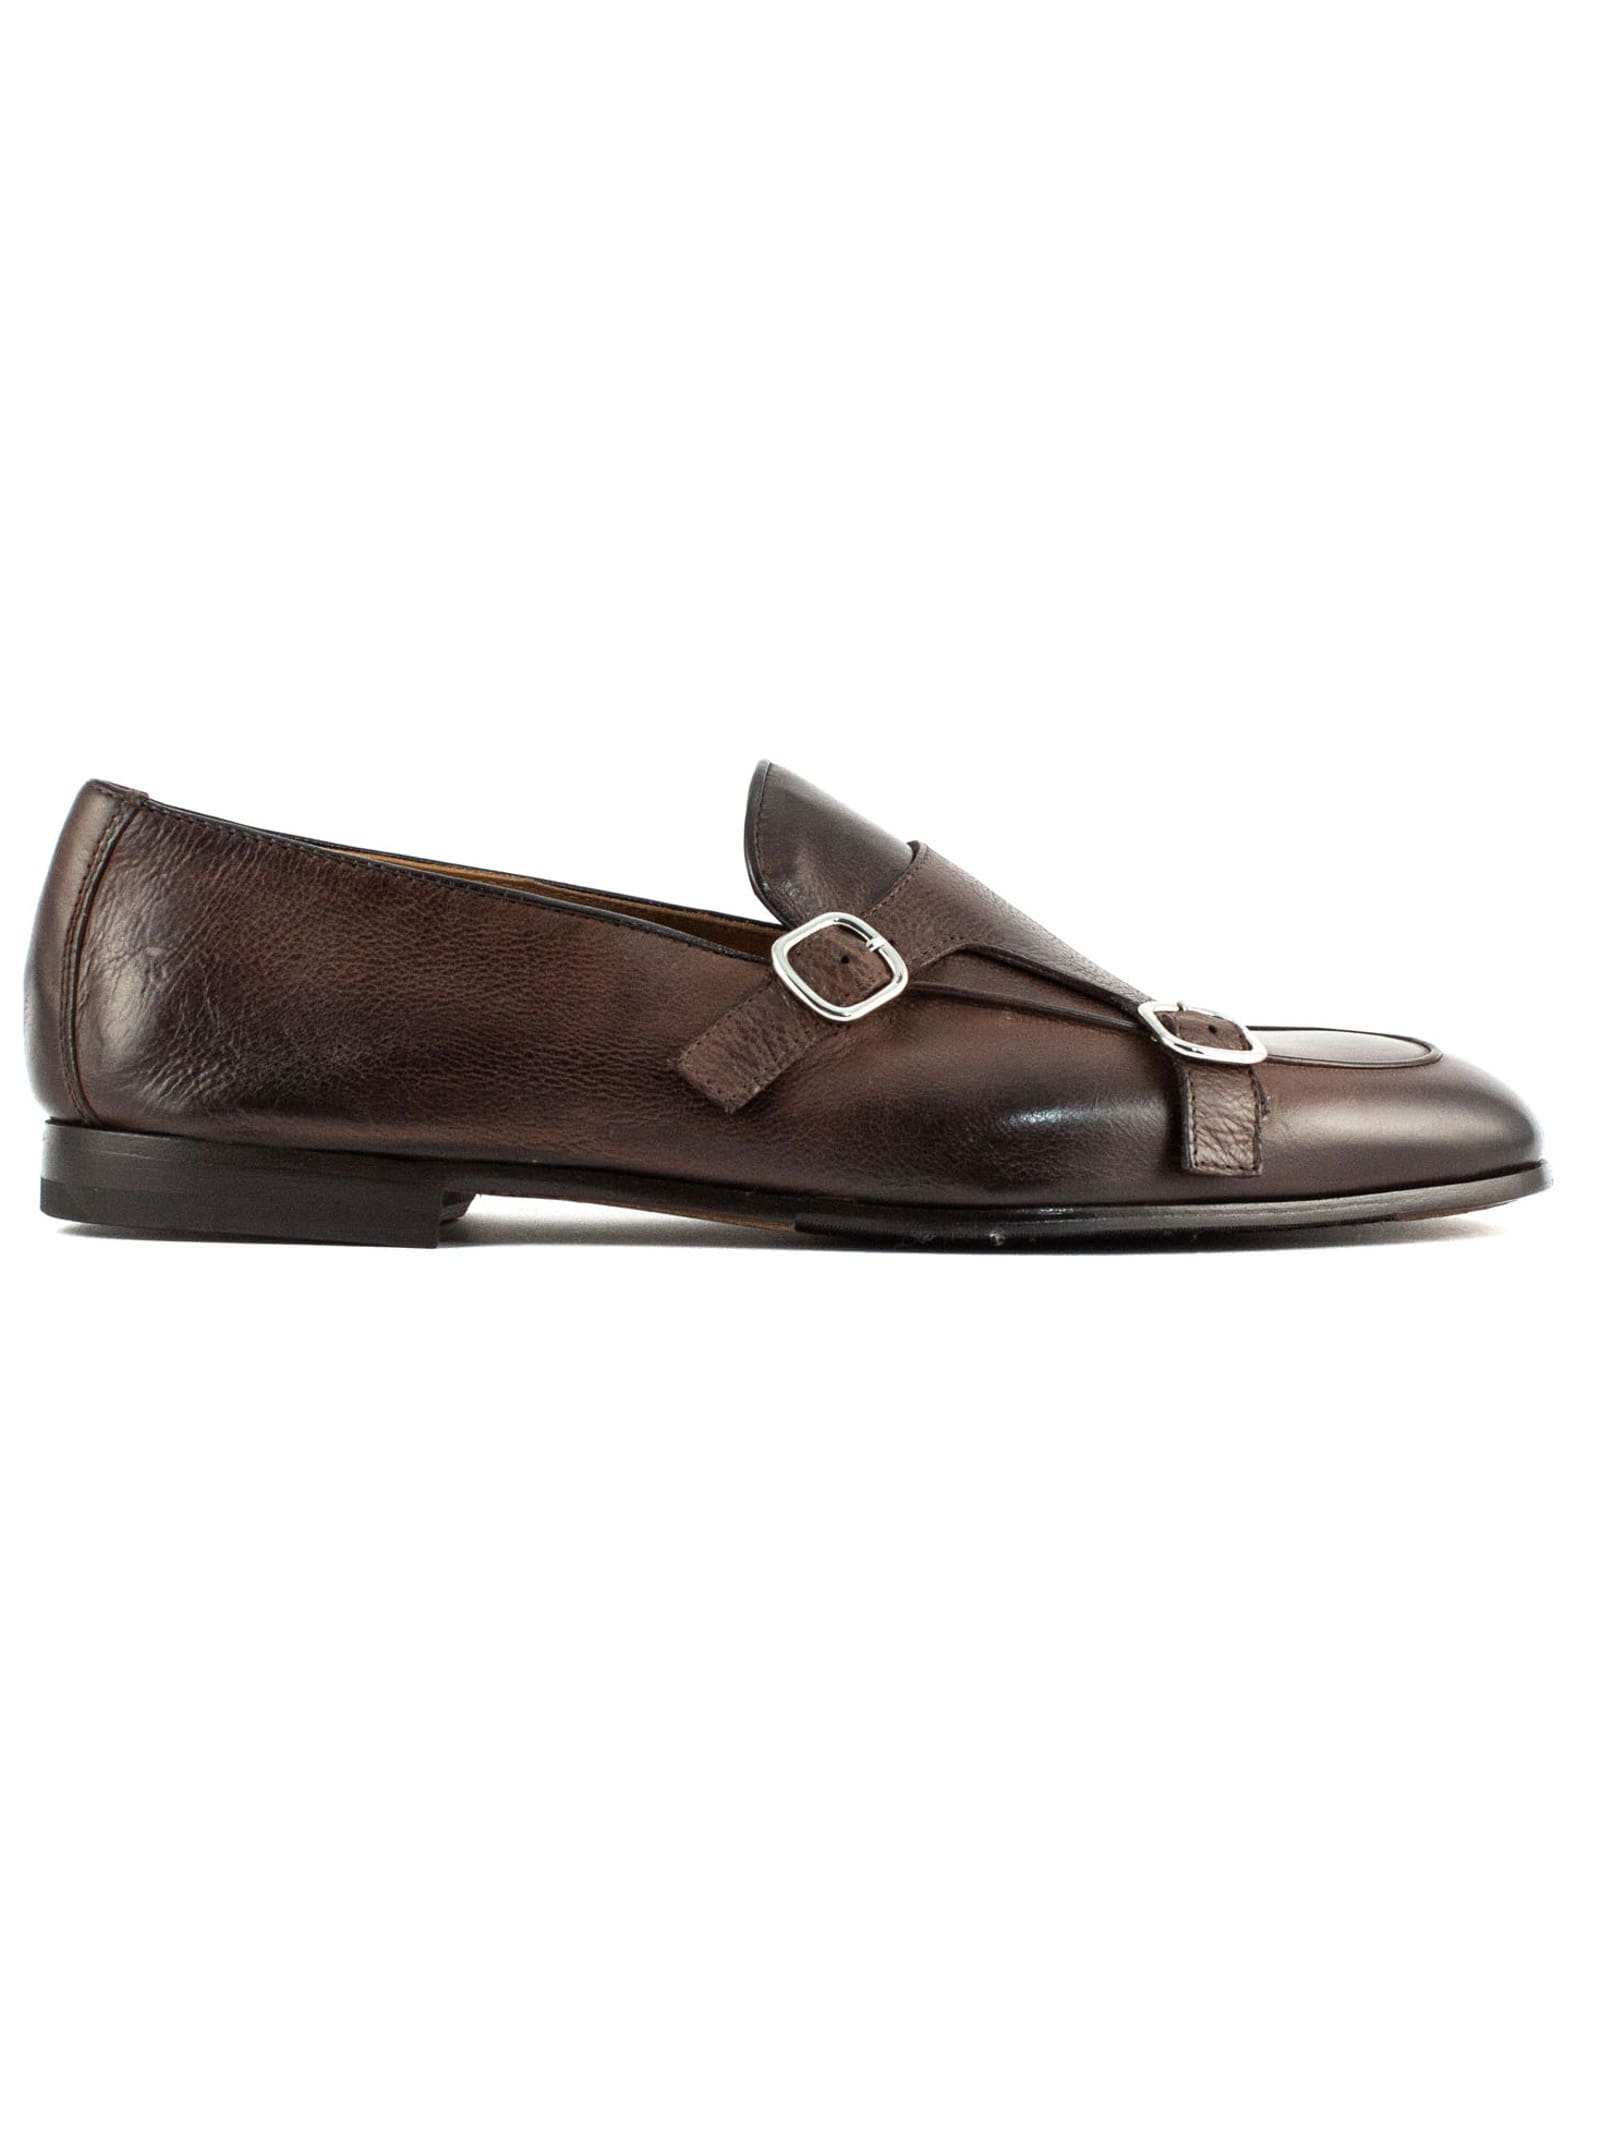 Doucal's Brown Leather Monk-strap Loafers